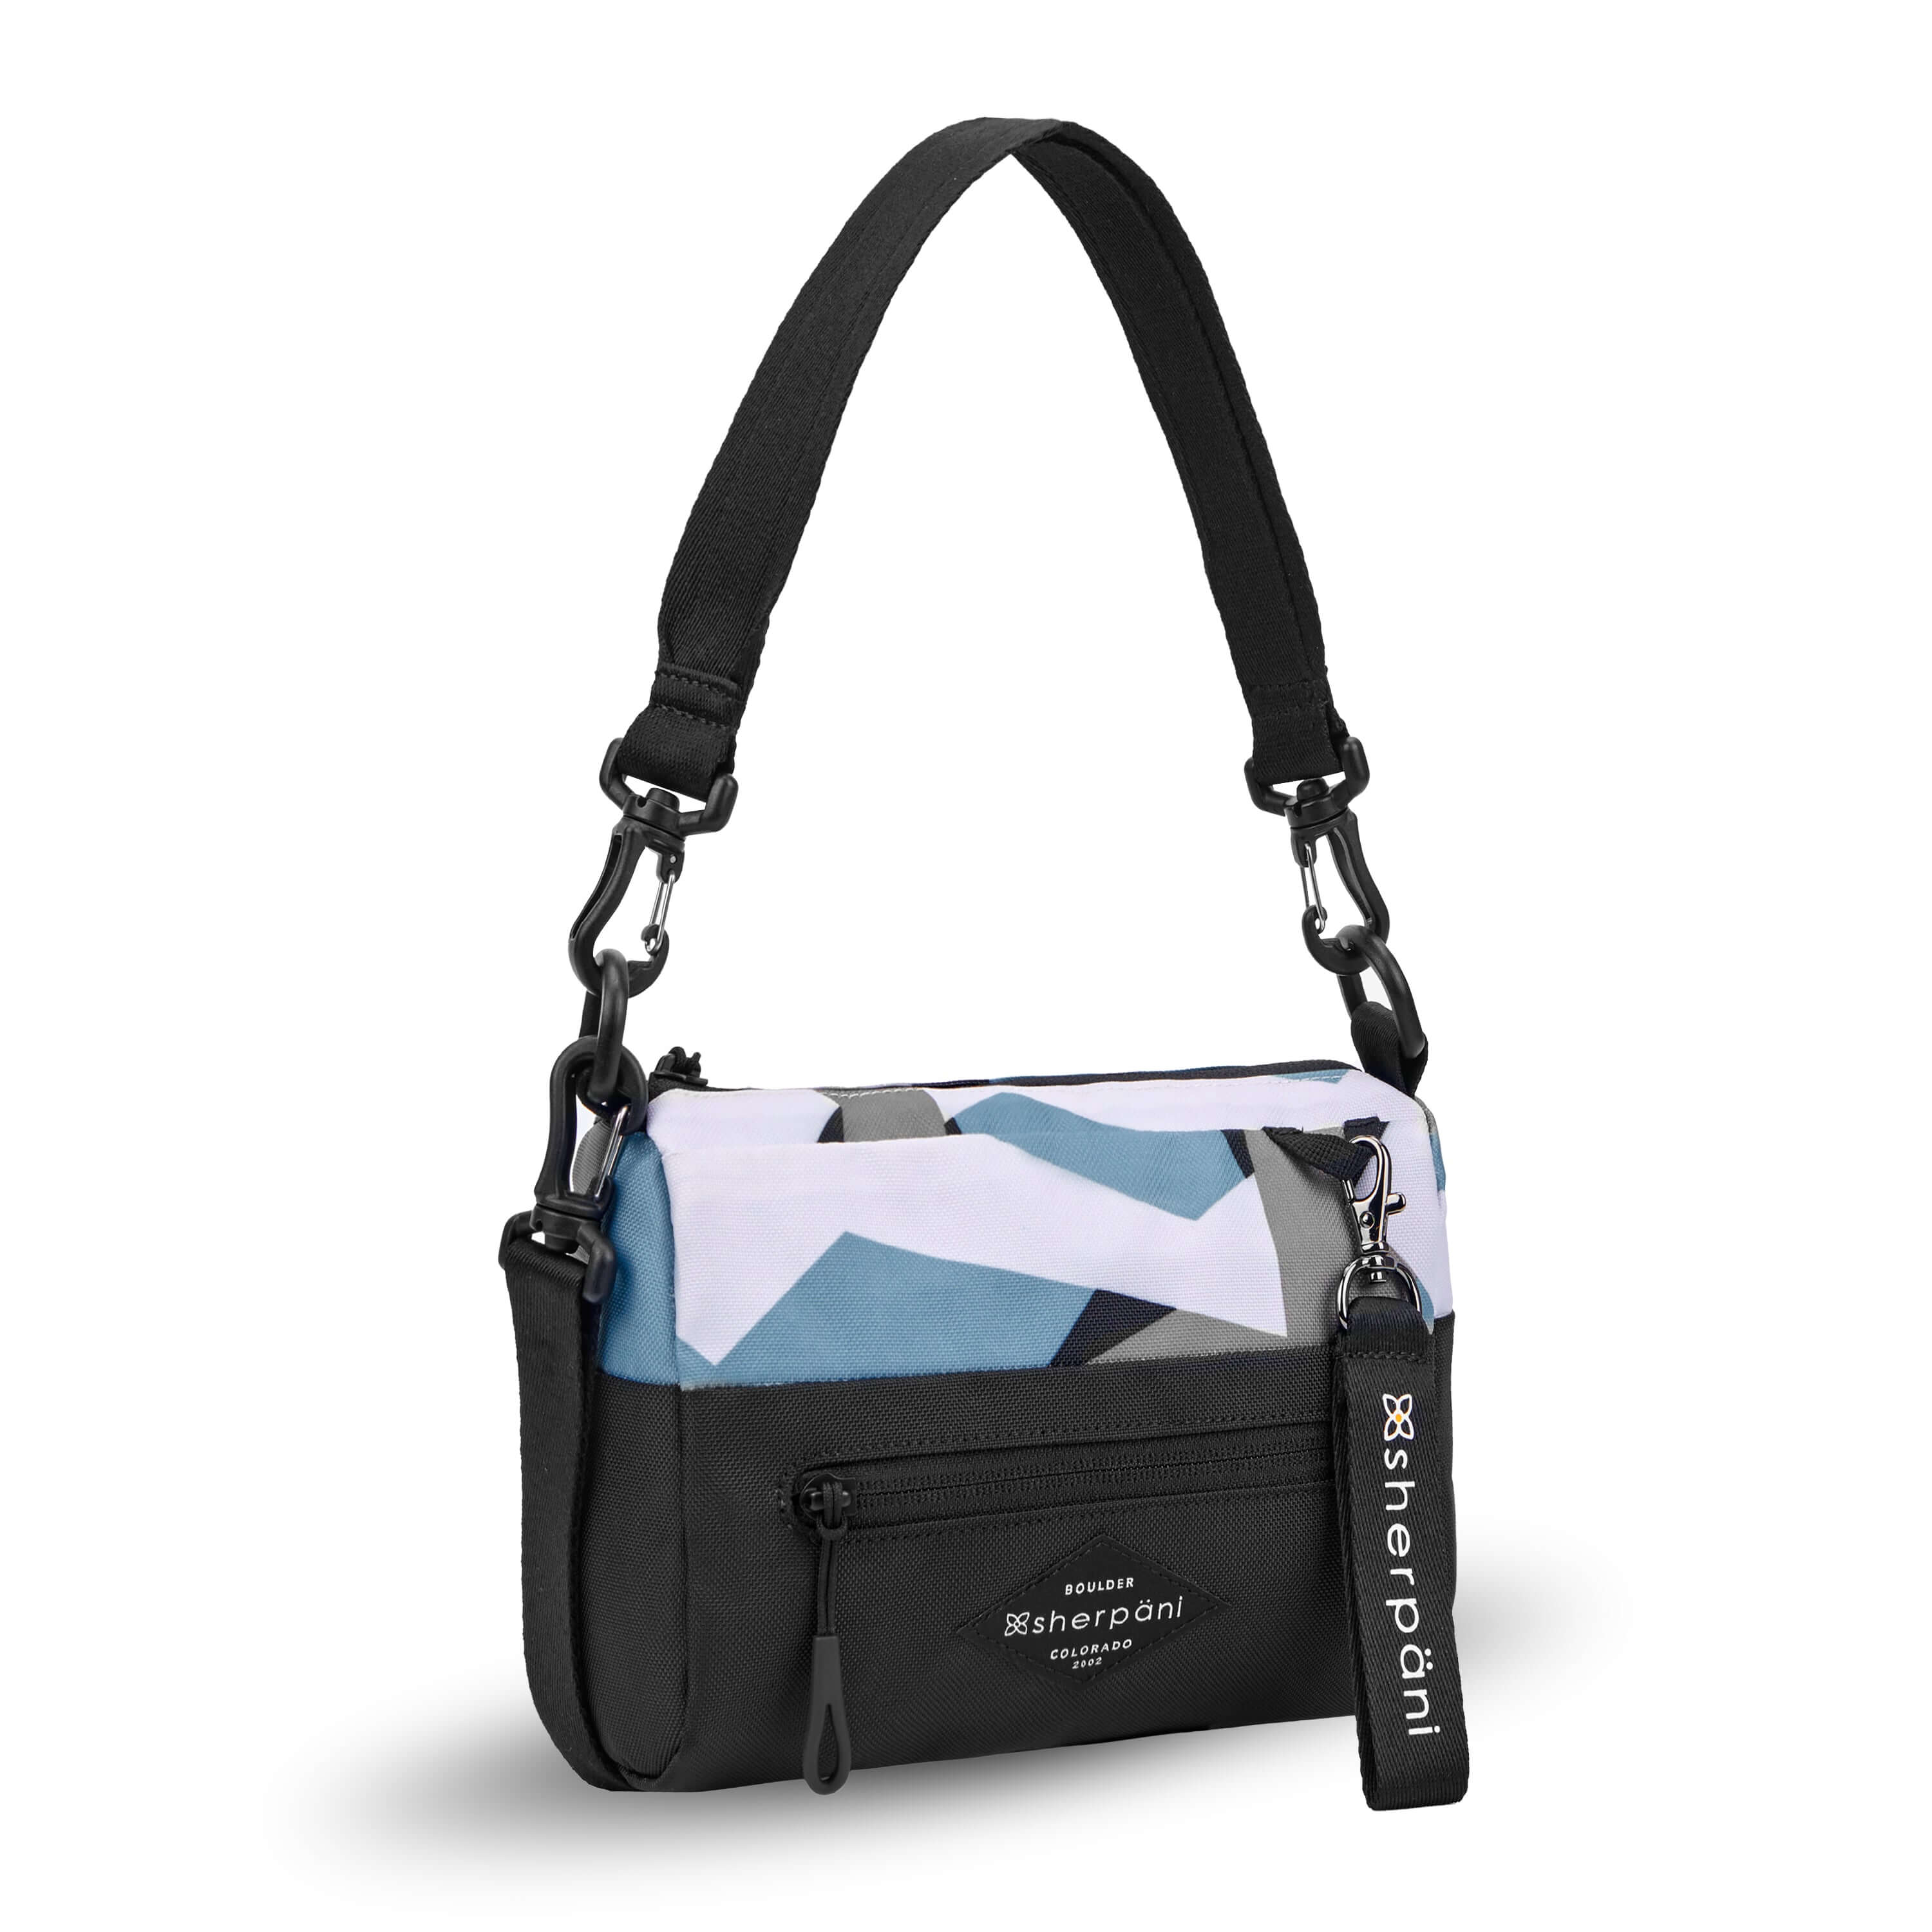 Angled front view of Sherpani's purse, the Skye in Summer Camo. It is two toned, the top half of the bag is a camouflage pattern of white, gray and blue and the bottom half of the bag is black. There is an external zipper compartment with an easy pull zipper accented in black. There is a branded Sherpani keychain clipped to the upper right corner. The bag has a detachable short strap and a longer detachable/adjustable crossbody strap. 